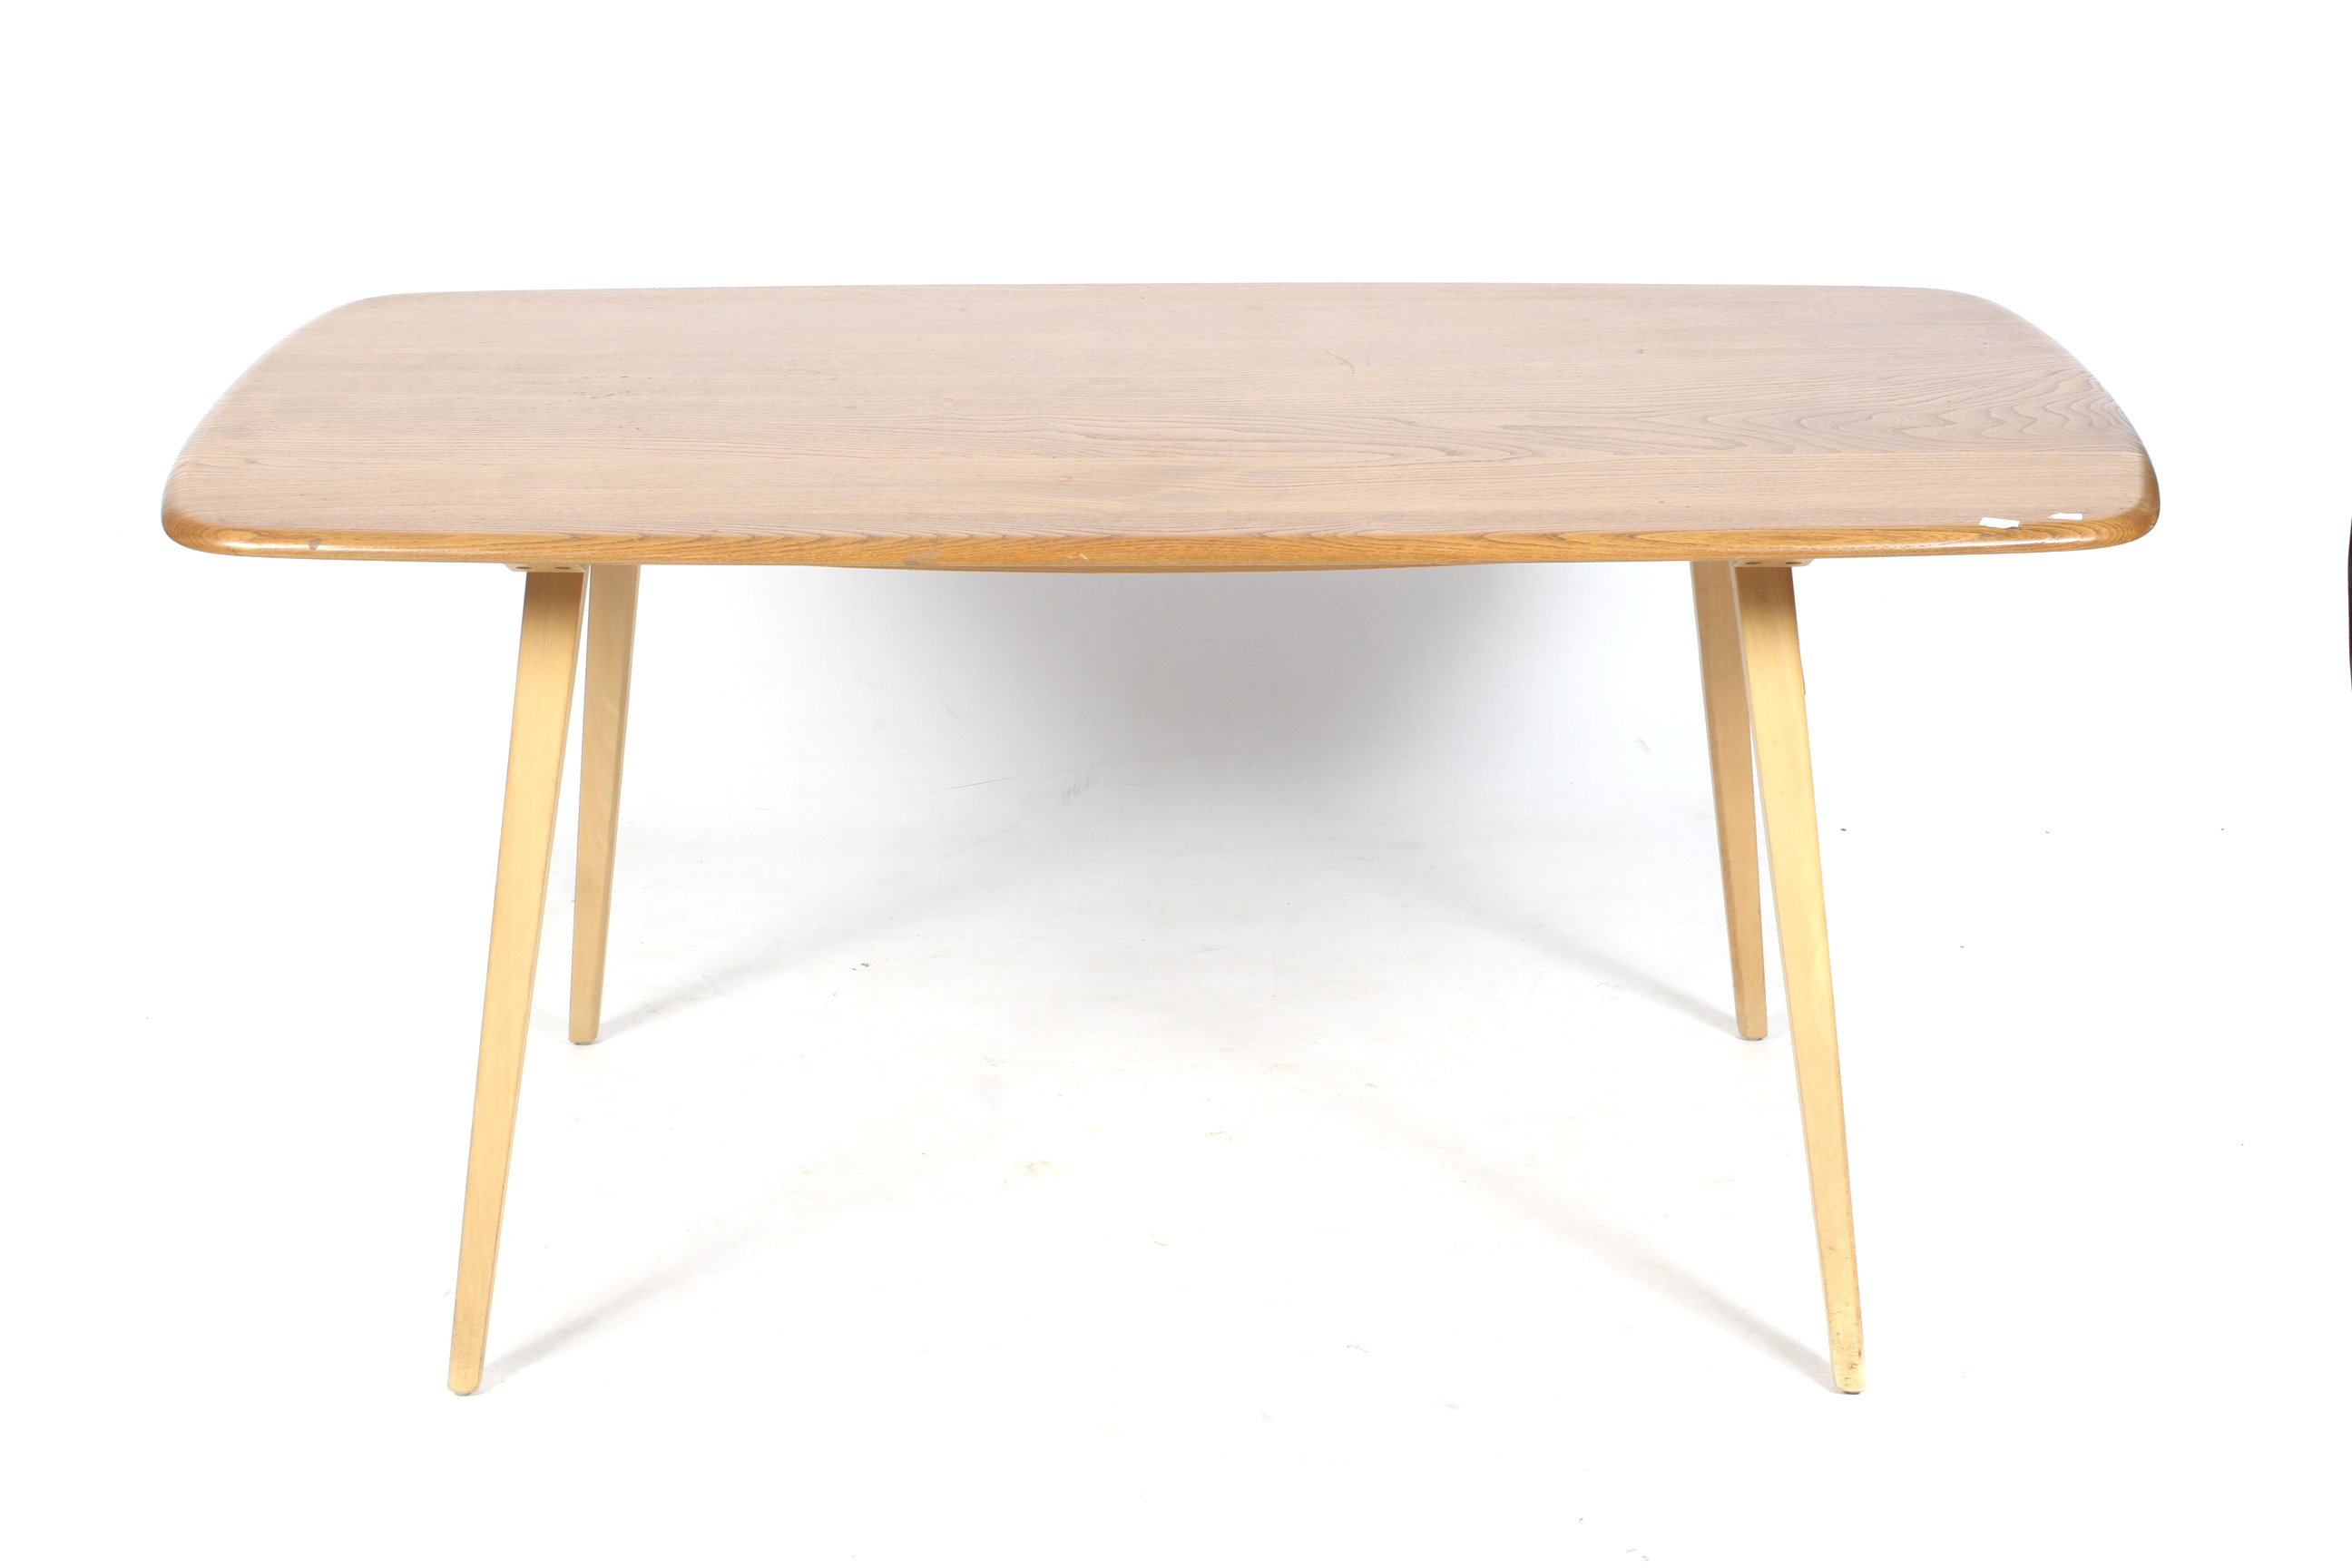 A mid-century Ercol (blue label) elm dining table.